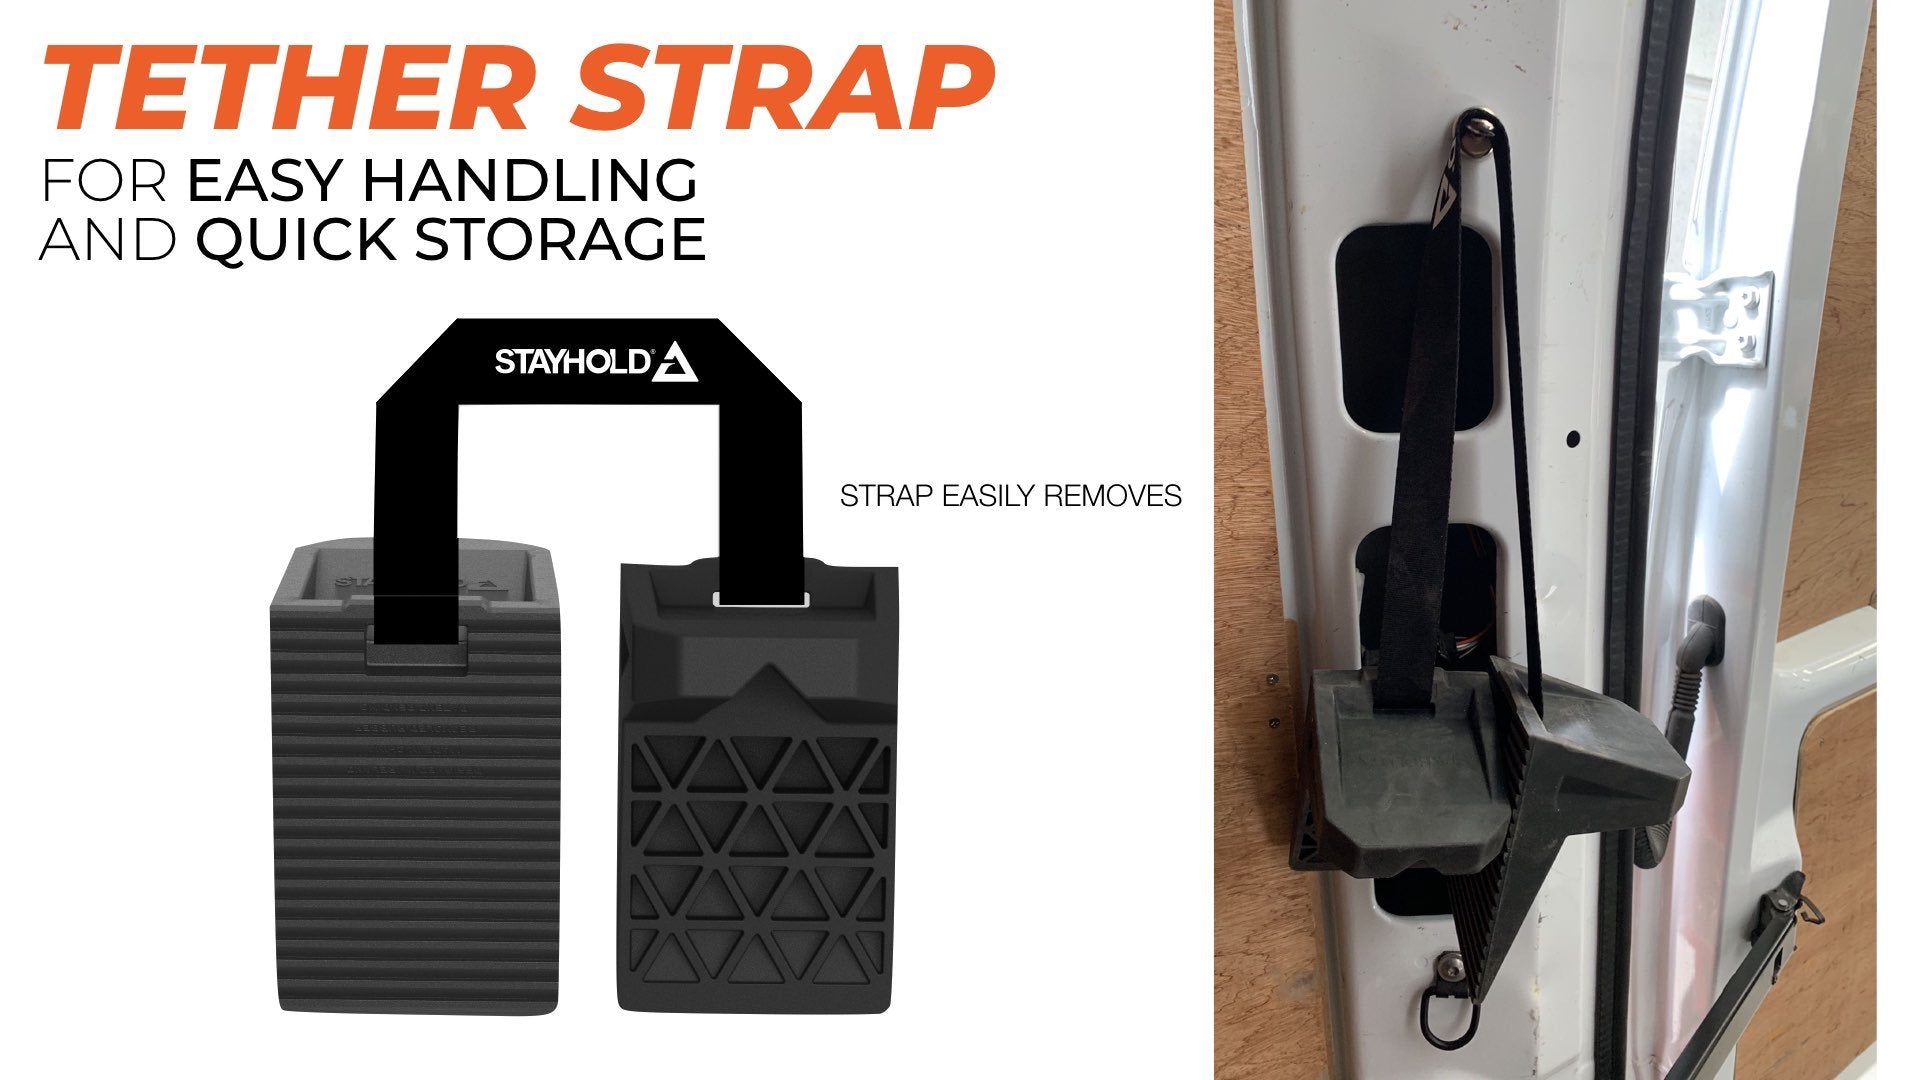 Stayhold CARGO WEDGE 2-PACK + TETHER. (Solid Rubber Cargo Chocks) hung up using tether strap